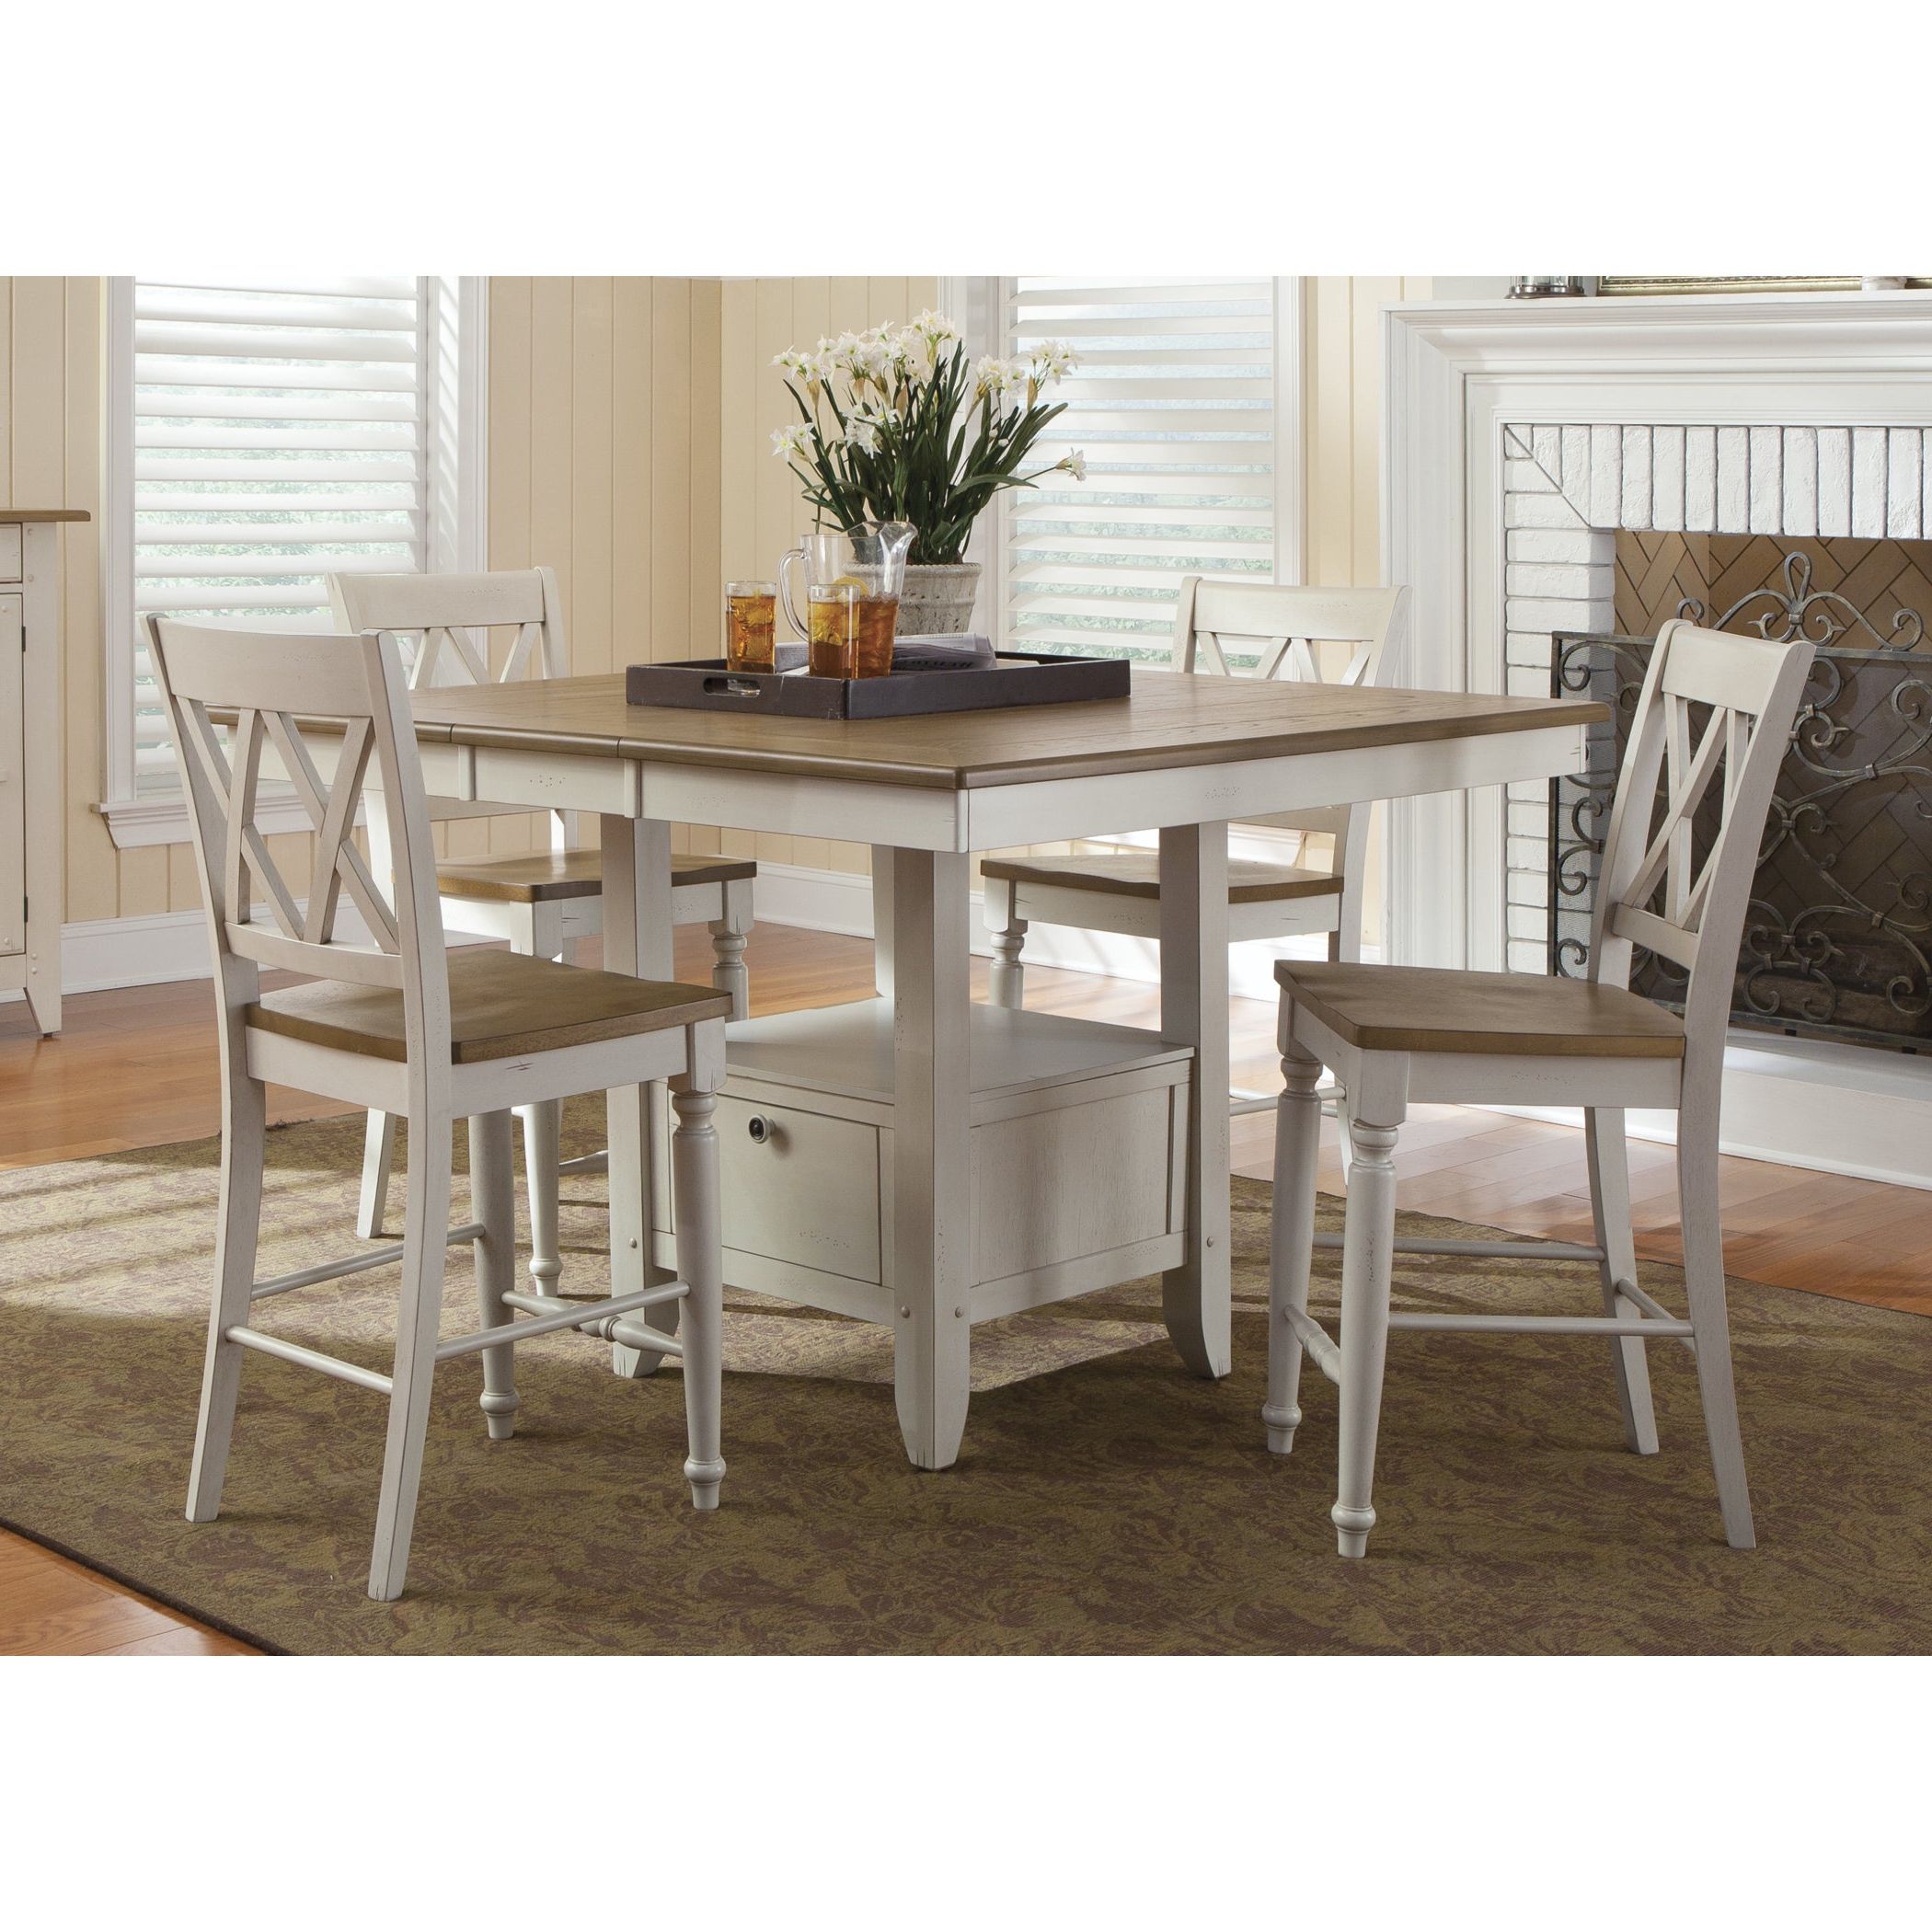 Transitional Antique Walnut Square Casual Dining Tables For Current Details About Al Fresco Two Tone Transitional 54x54 Gathering Table –  Antique White (View 21 of 30)